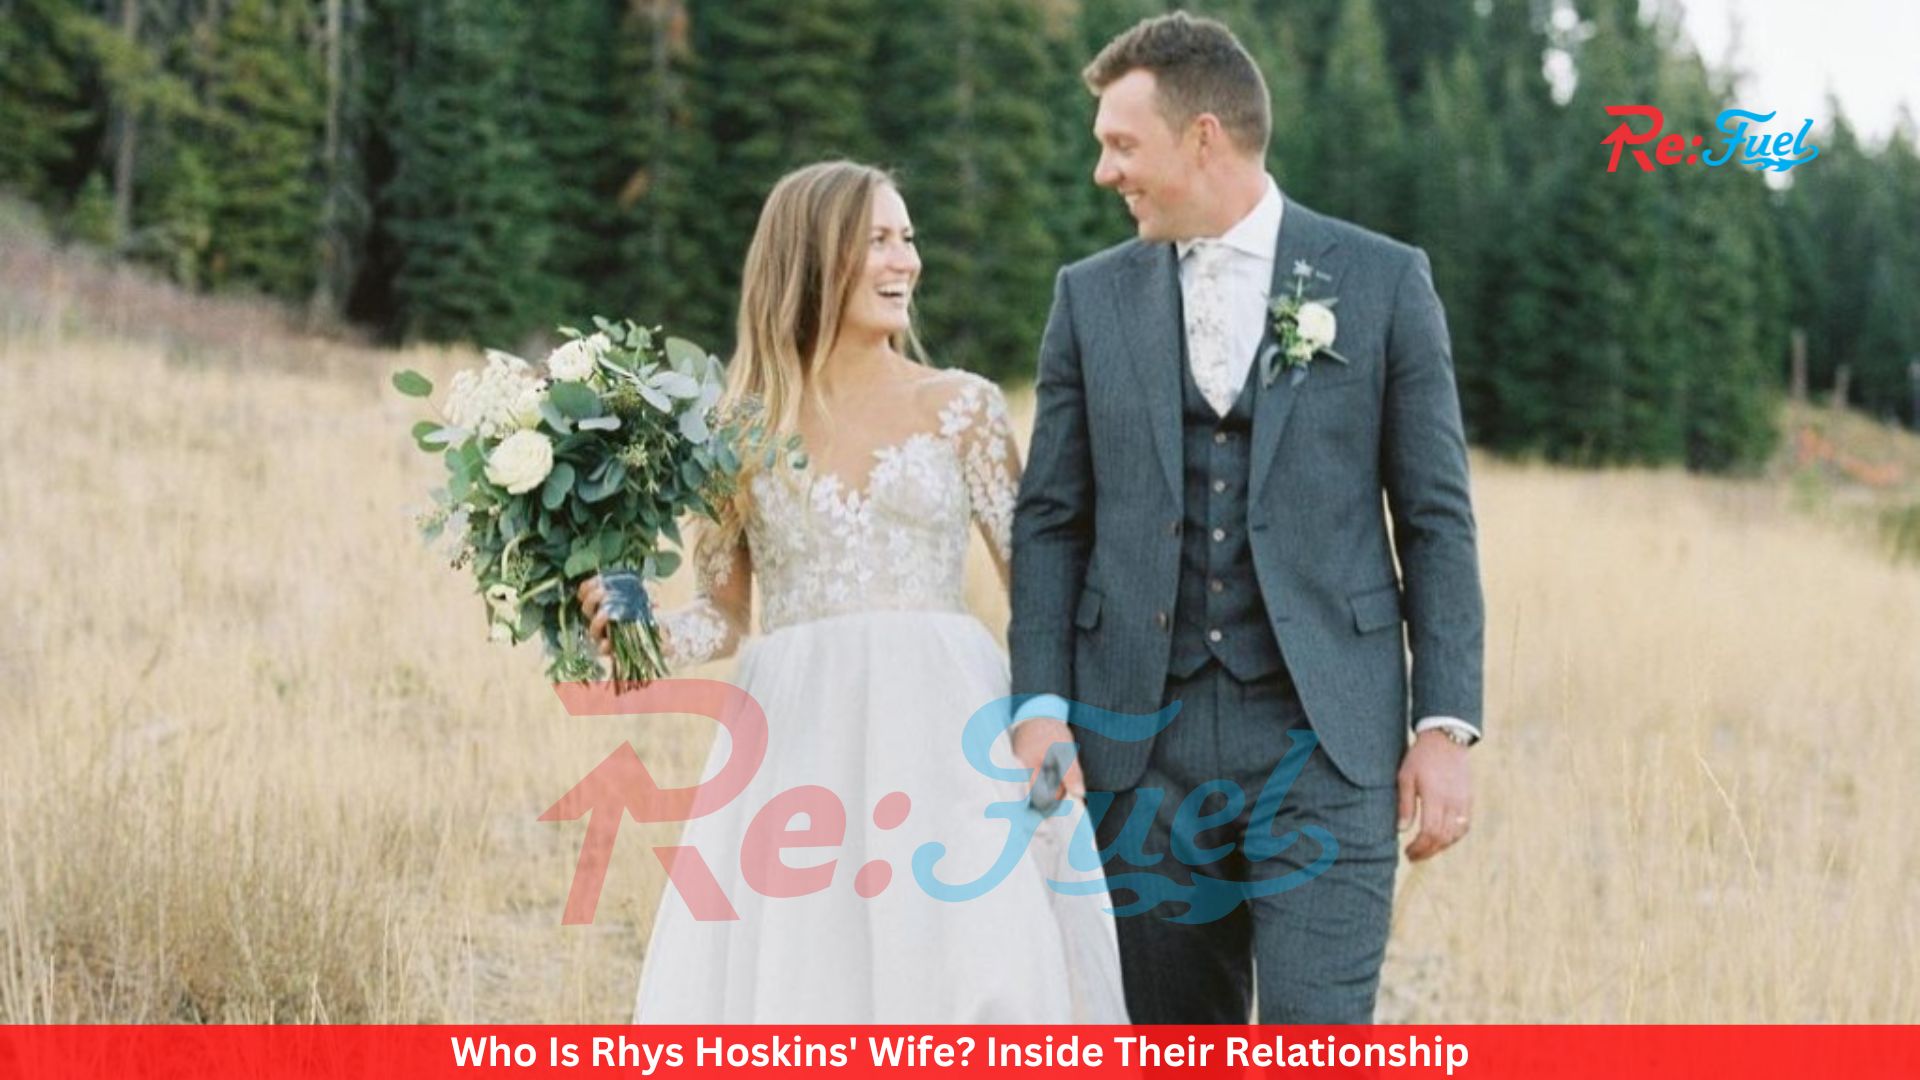 Who Is Rhys Hoskins' Wife? Inside Their Relationship